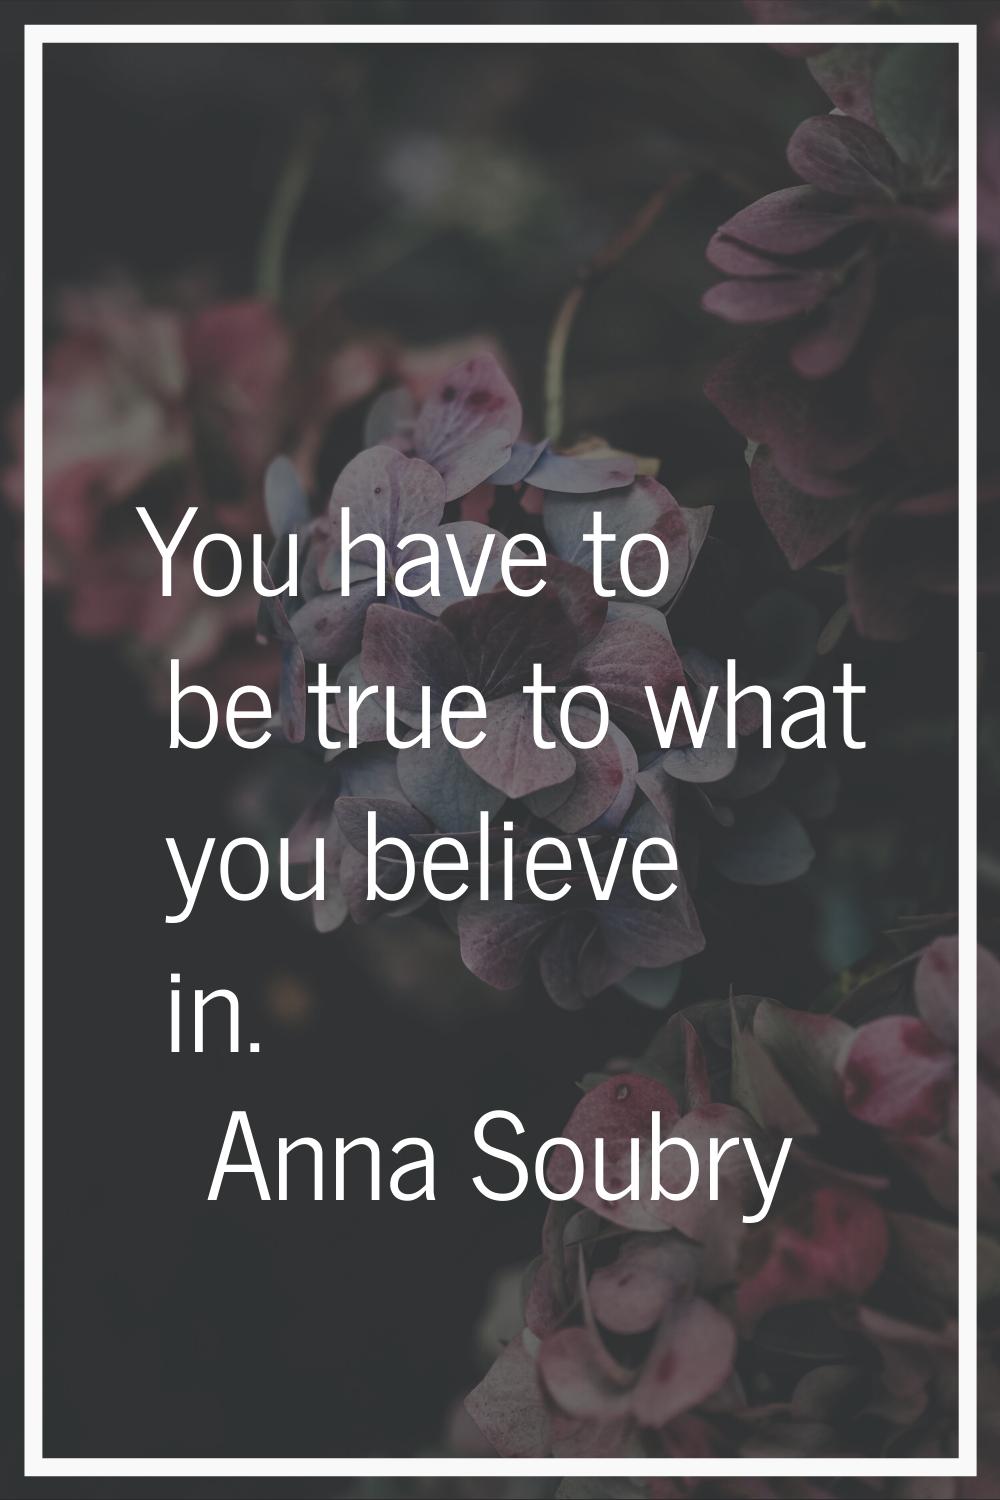 You have to be true to what you believe in.